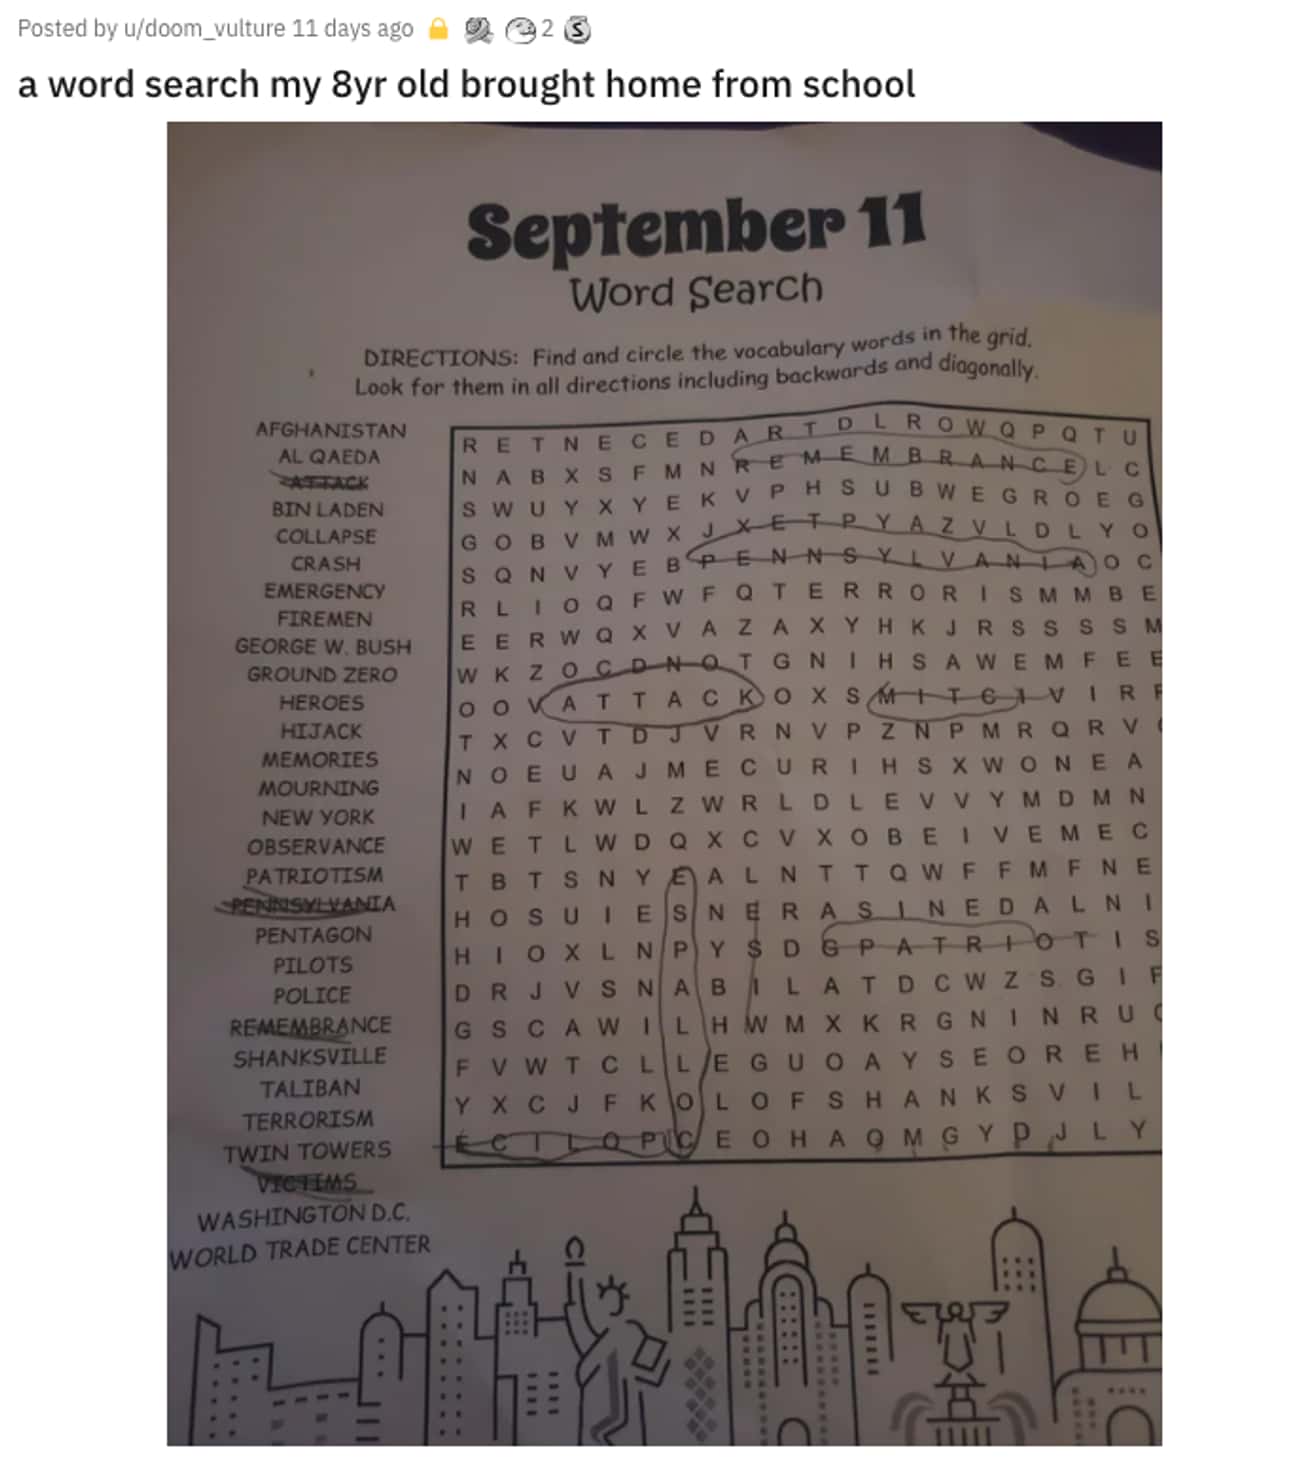 cringe posts - word search - Posted by udoom_vulture 11 days ago 23 a word search my 8yr old brought home from school September 11 1 Word Search Directions Find and circle the vocabulary words in the grid. Look for them in all directions including backwar